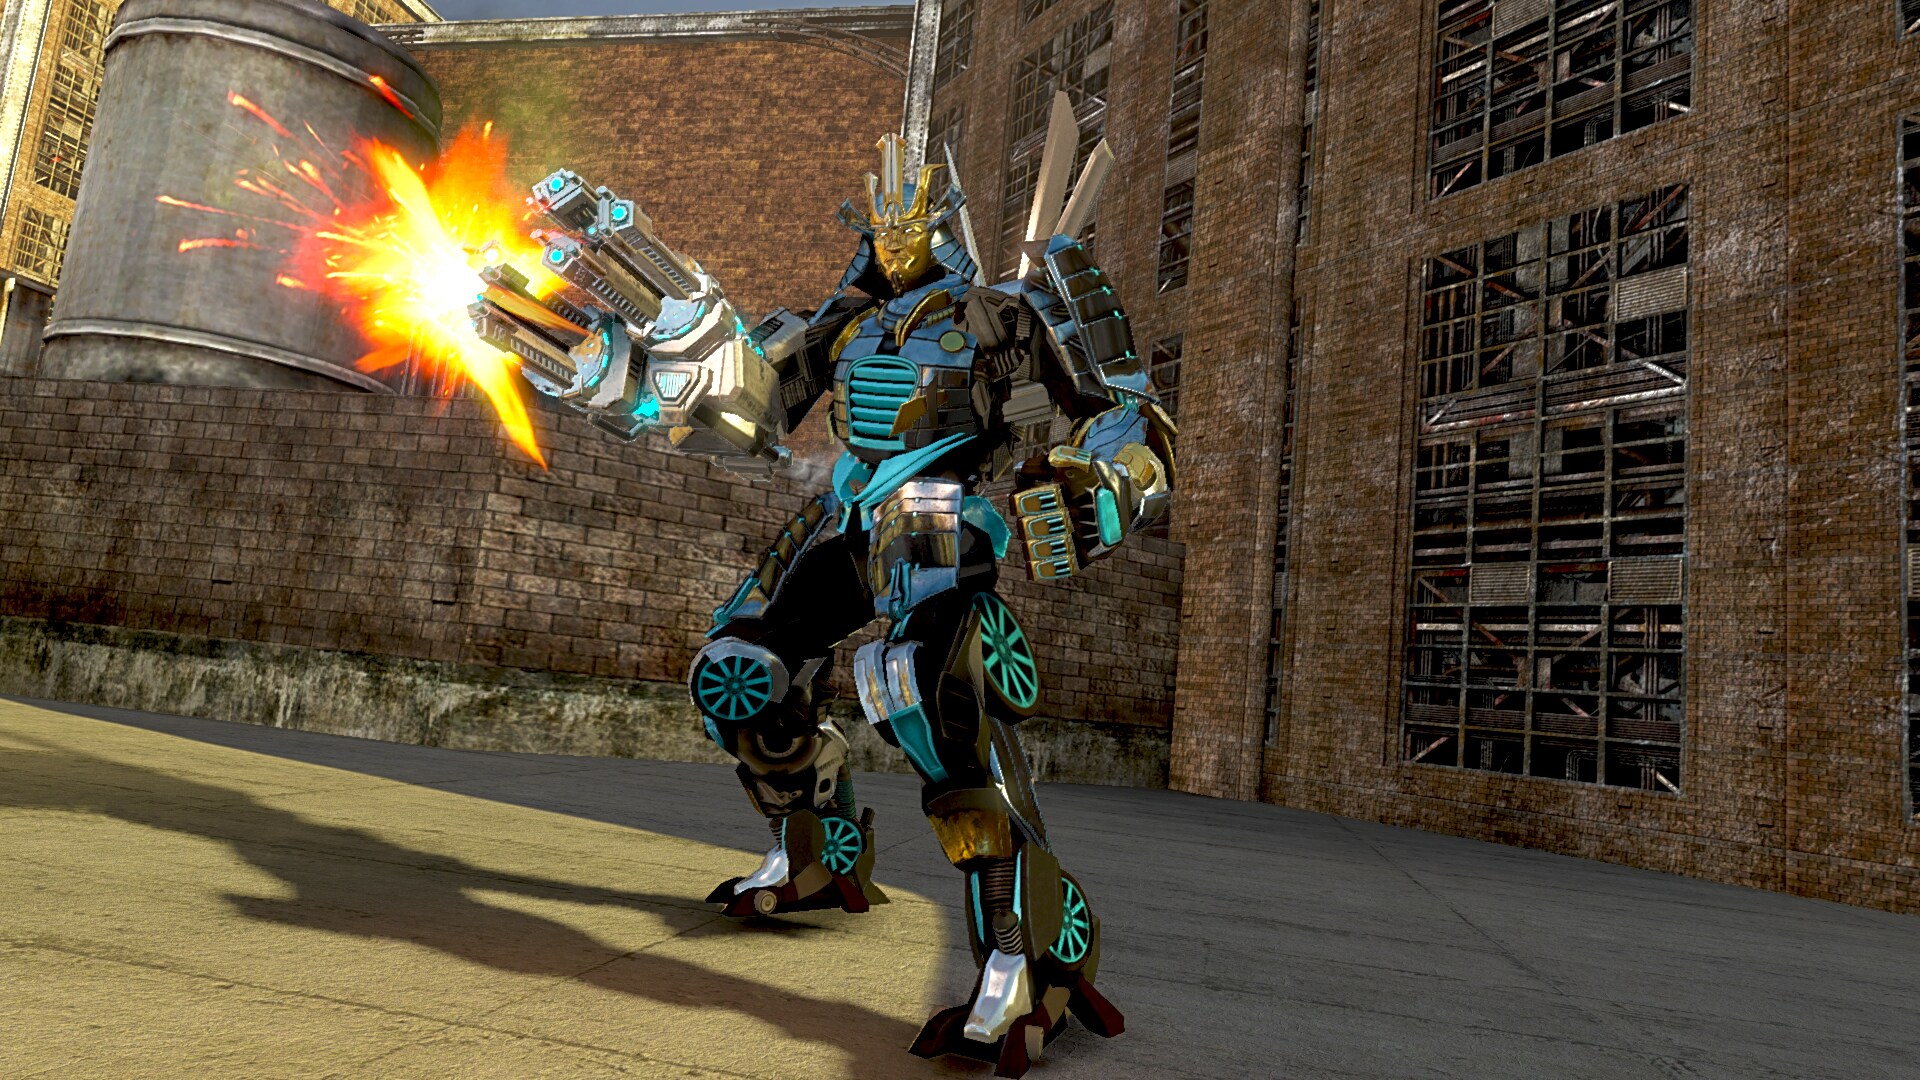 Transformers rise of the dark spark steam фото 2